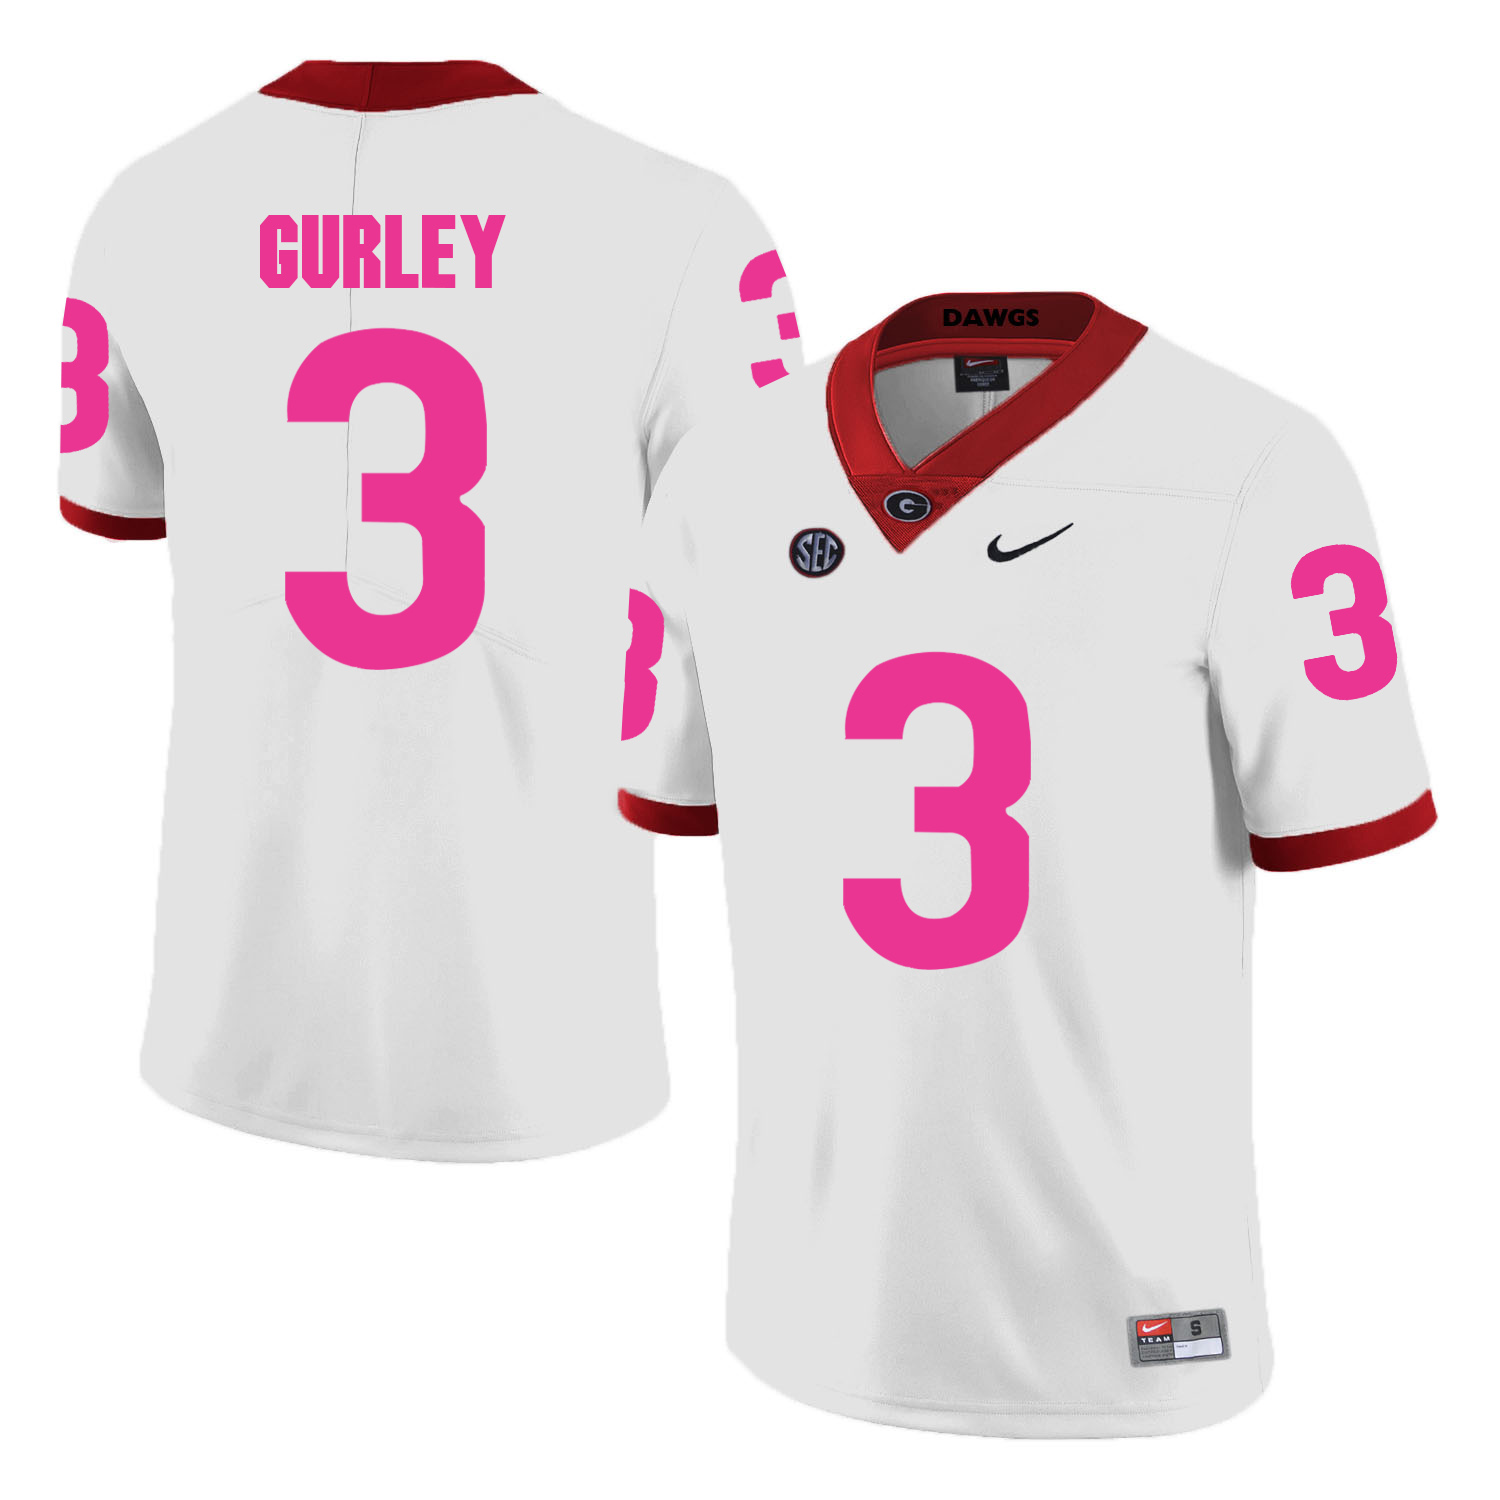 Georgia Bulldogs 3 Todd Gurley White 2018 Breast Cancer Awareness College Football Jersey